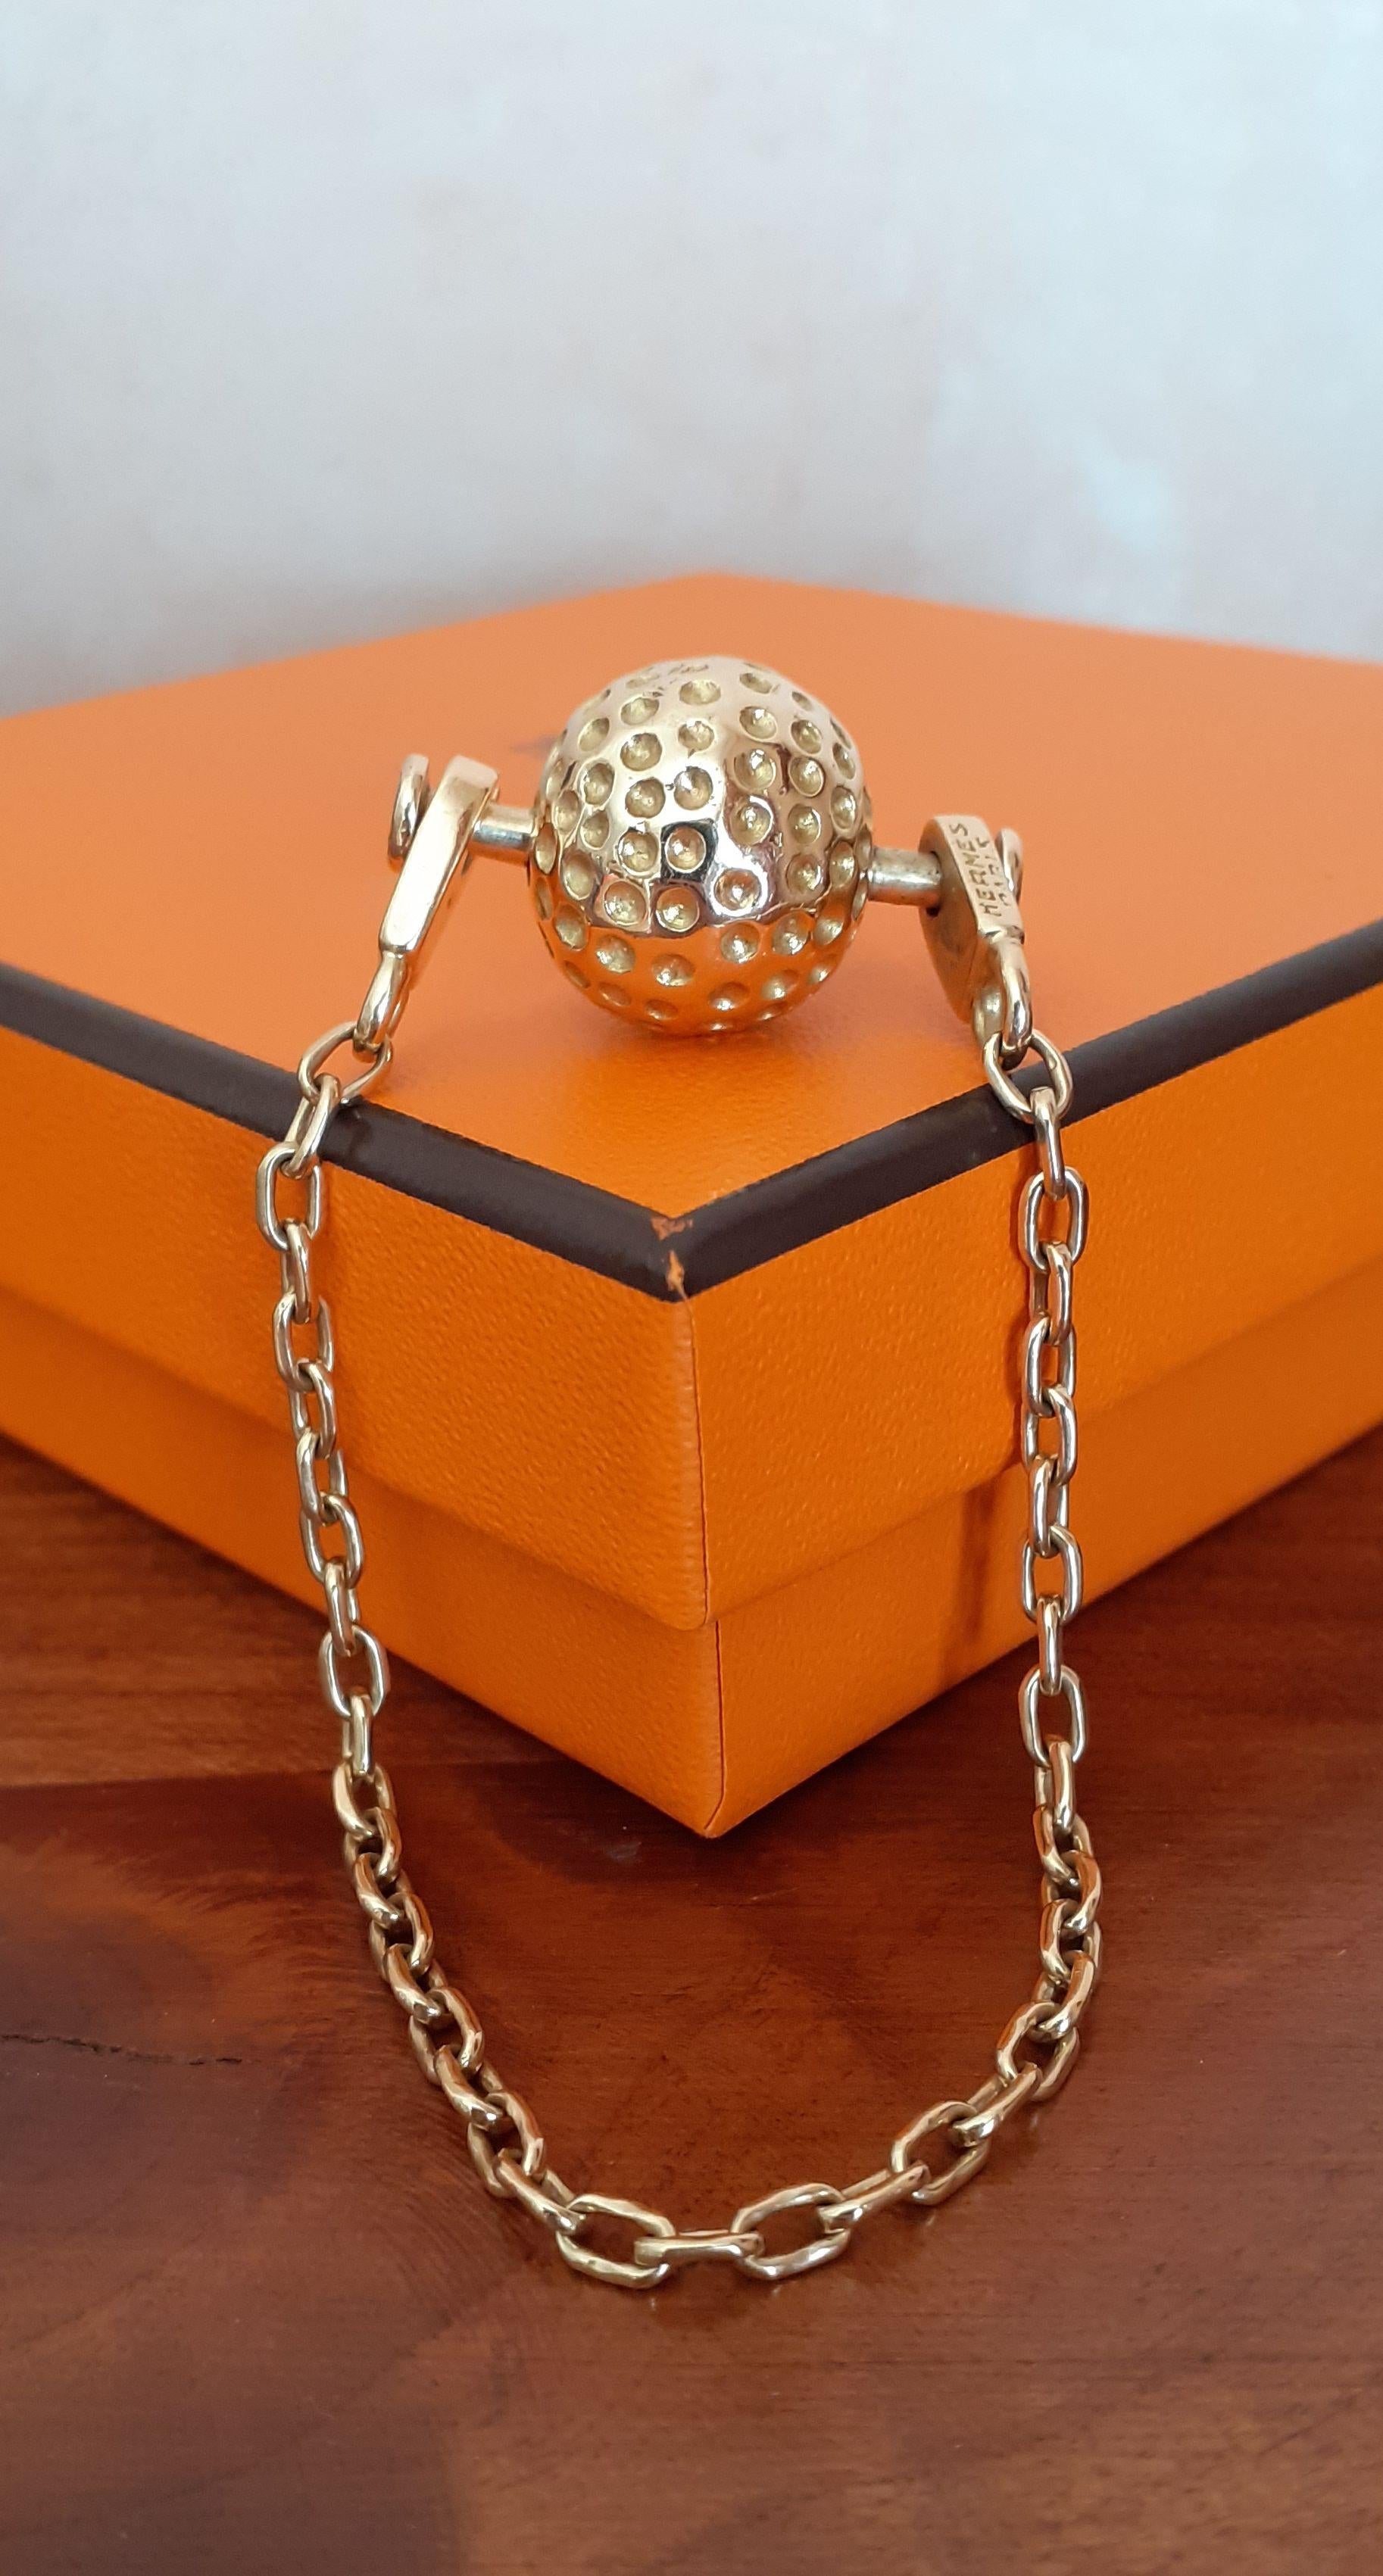 Women's or Men's Exceptional Hermès Key Holder Keychain Golf Ball Shape in Yellow Gold RARE For Sale